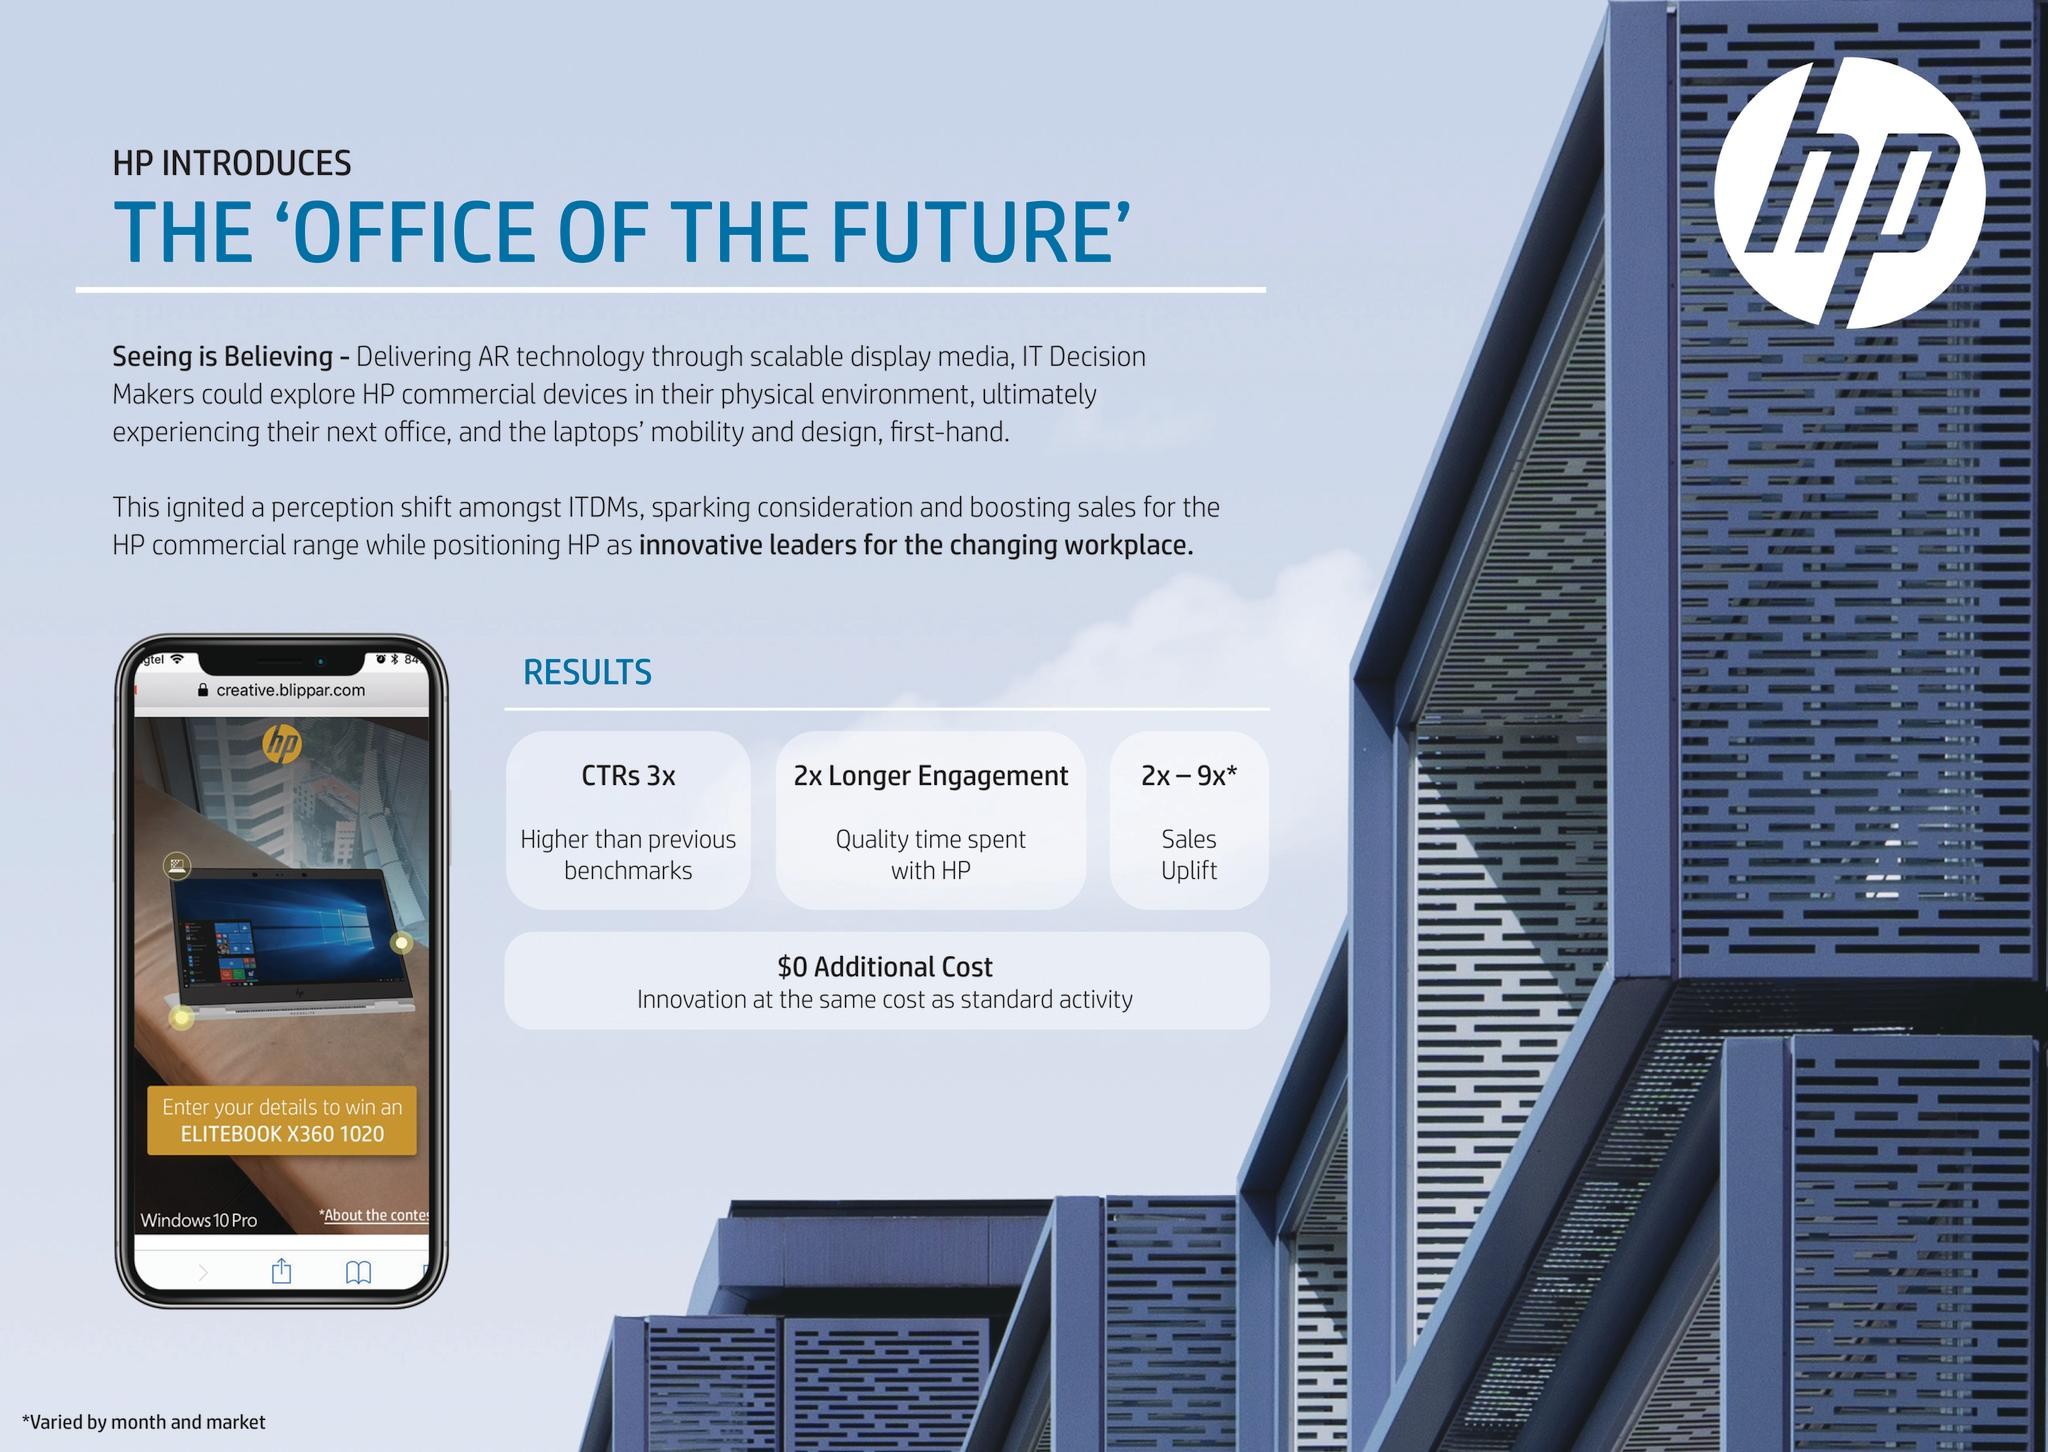 HP's Office of the Future